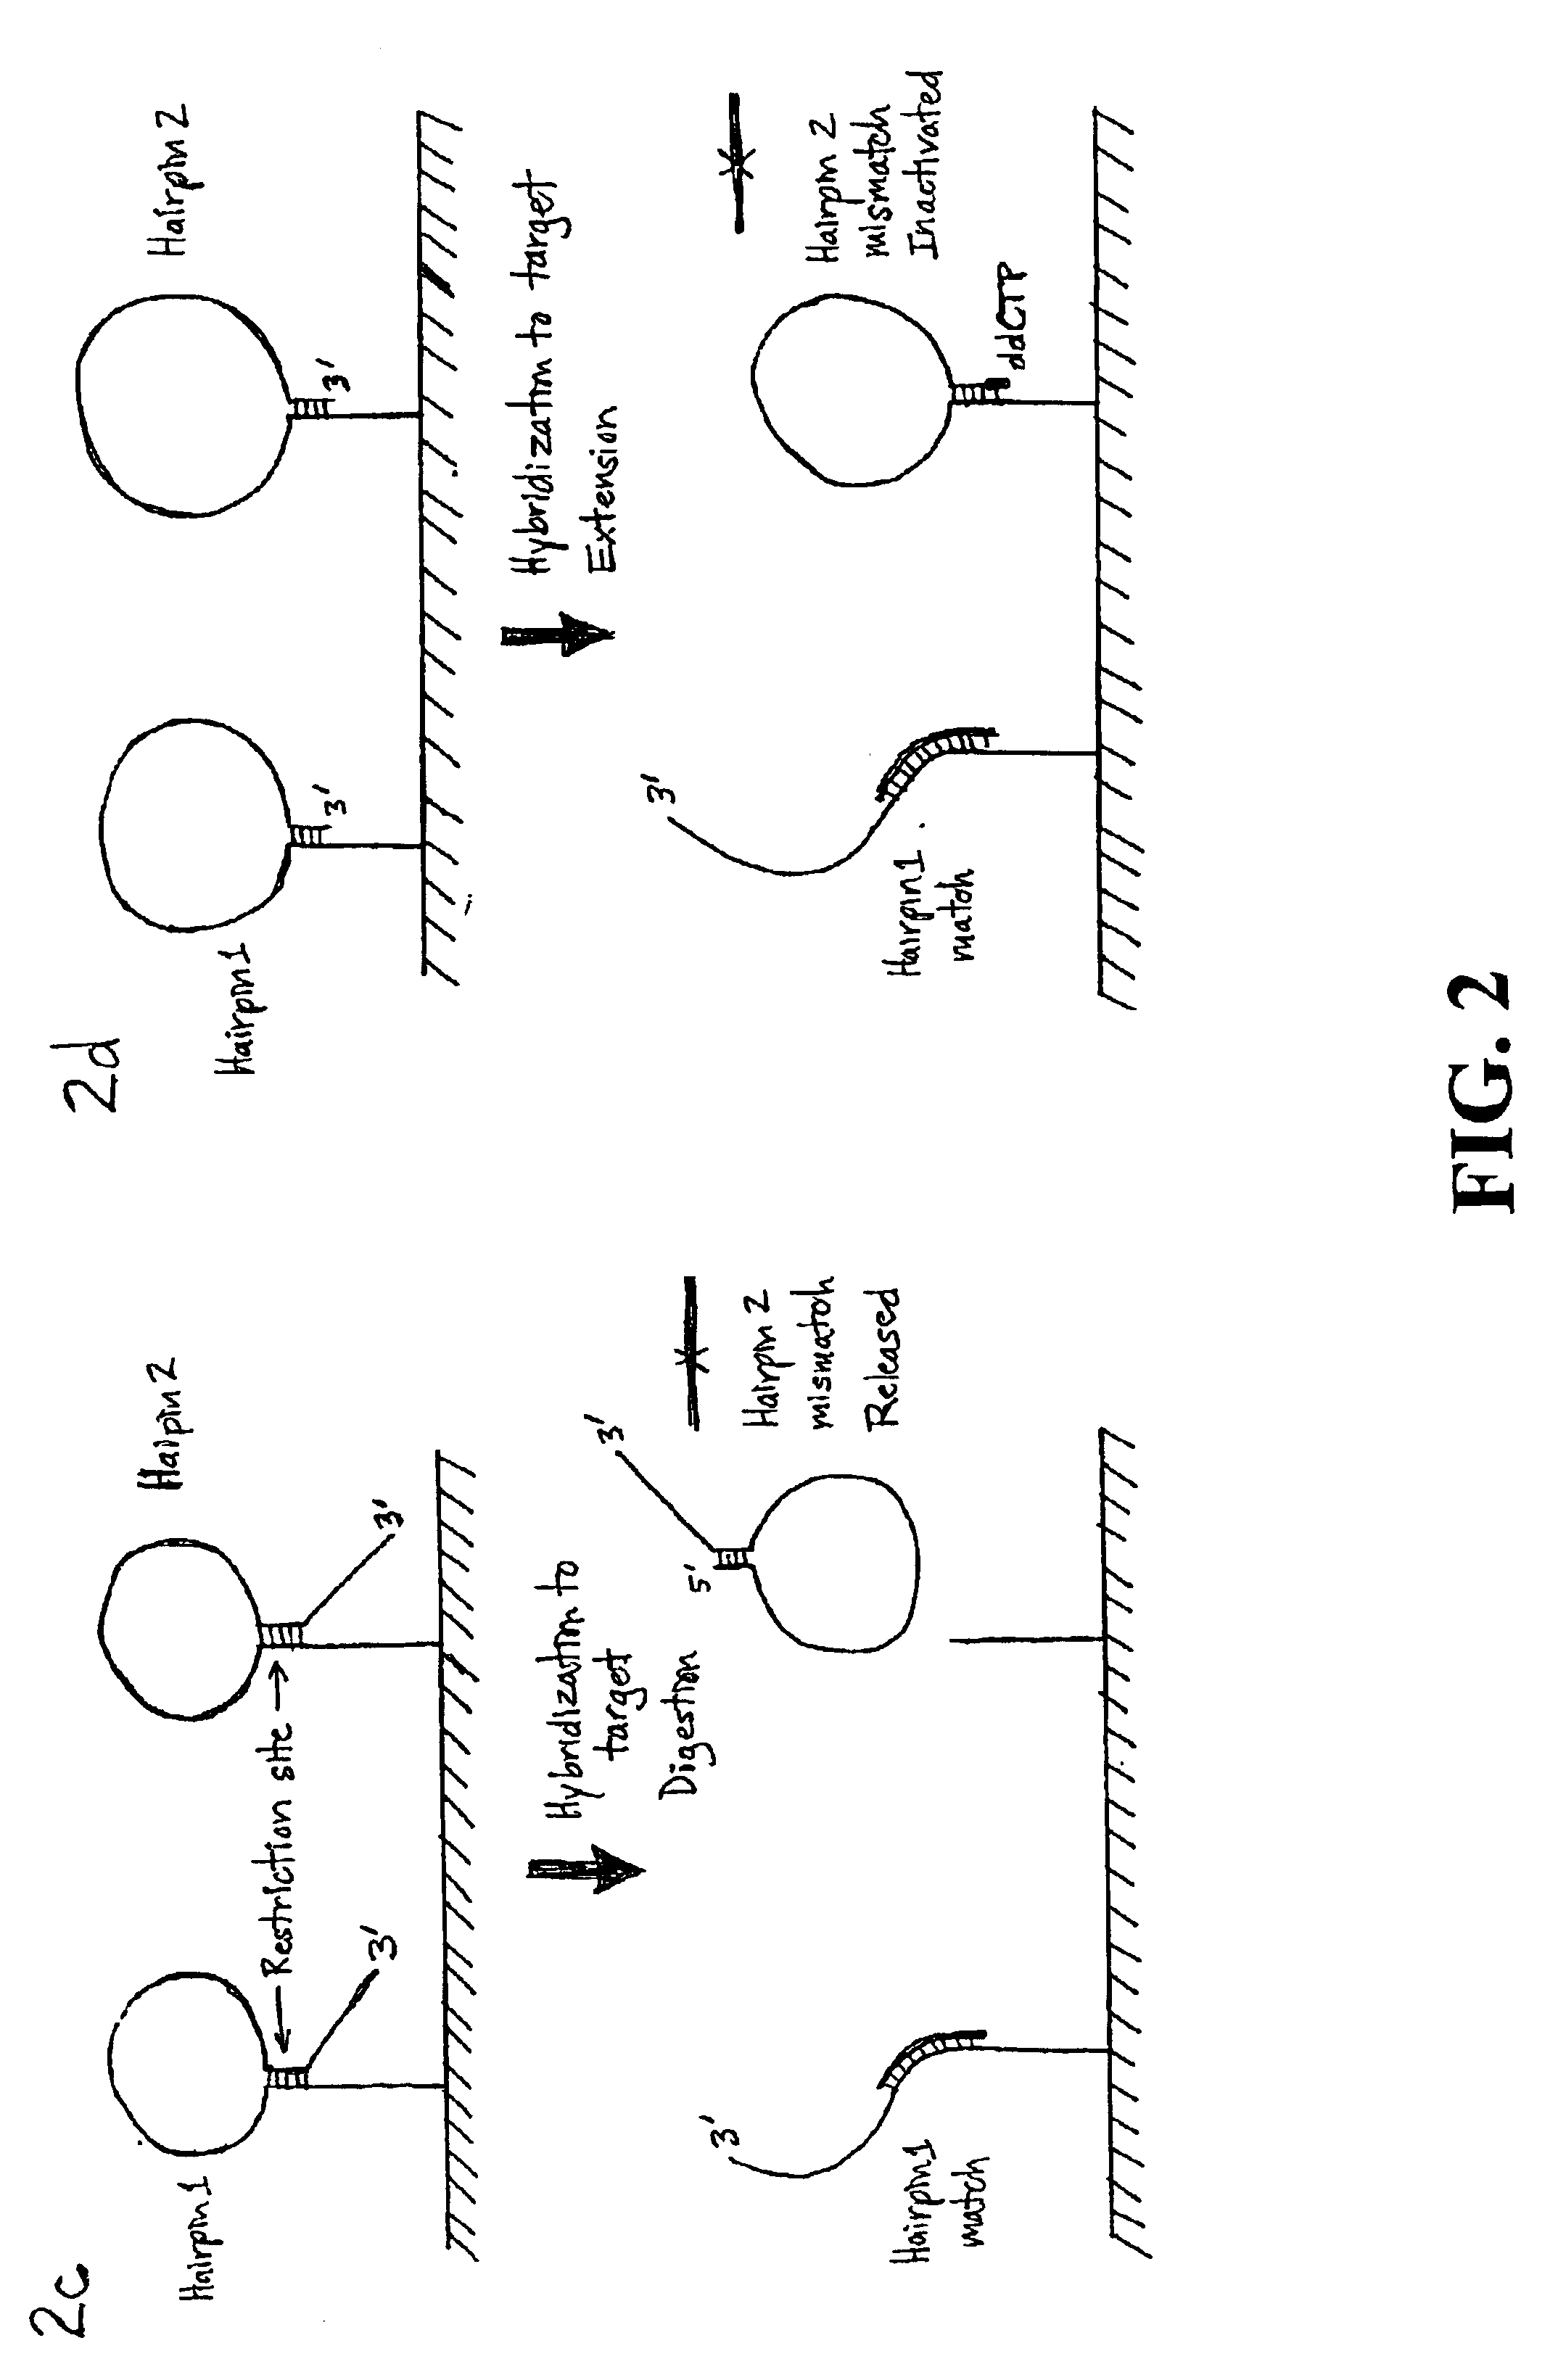 Nucleic acid detection using structured probes